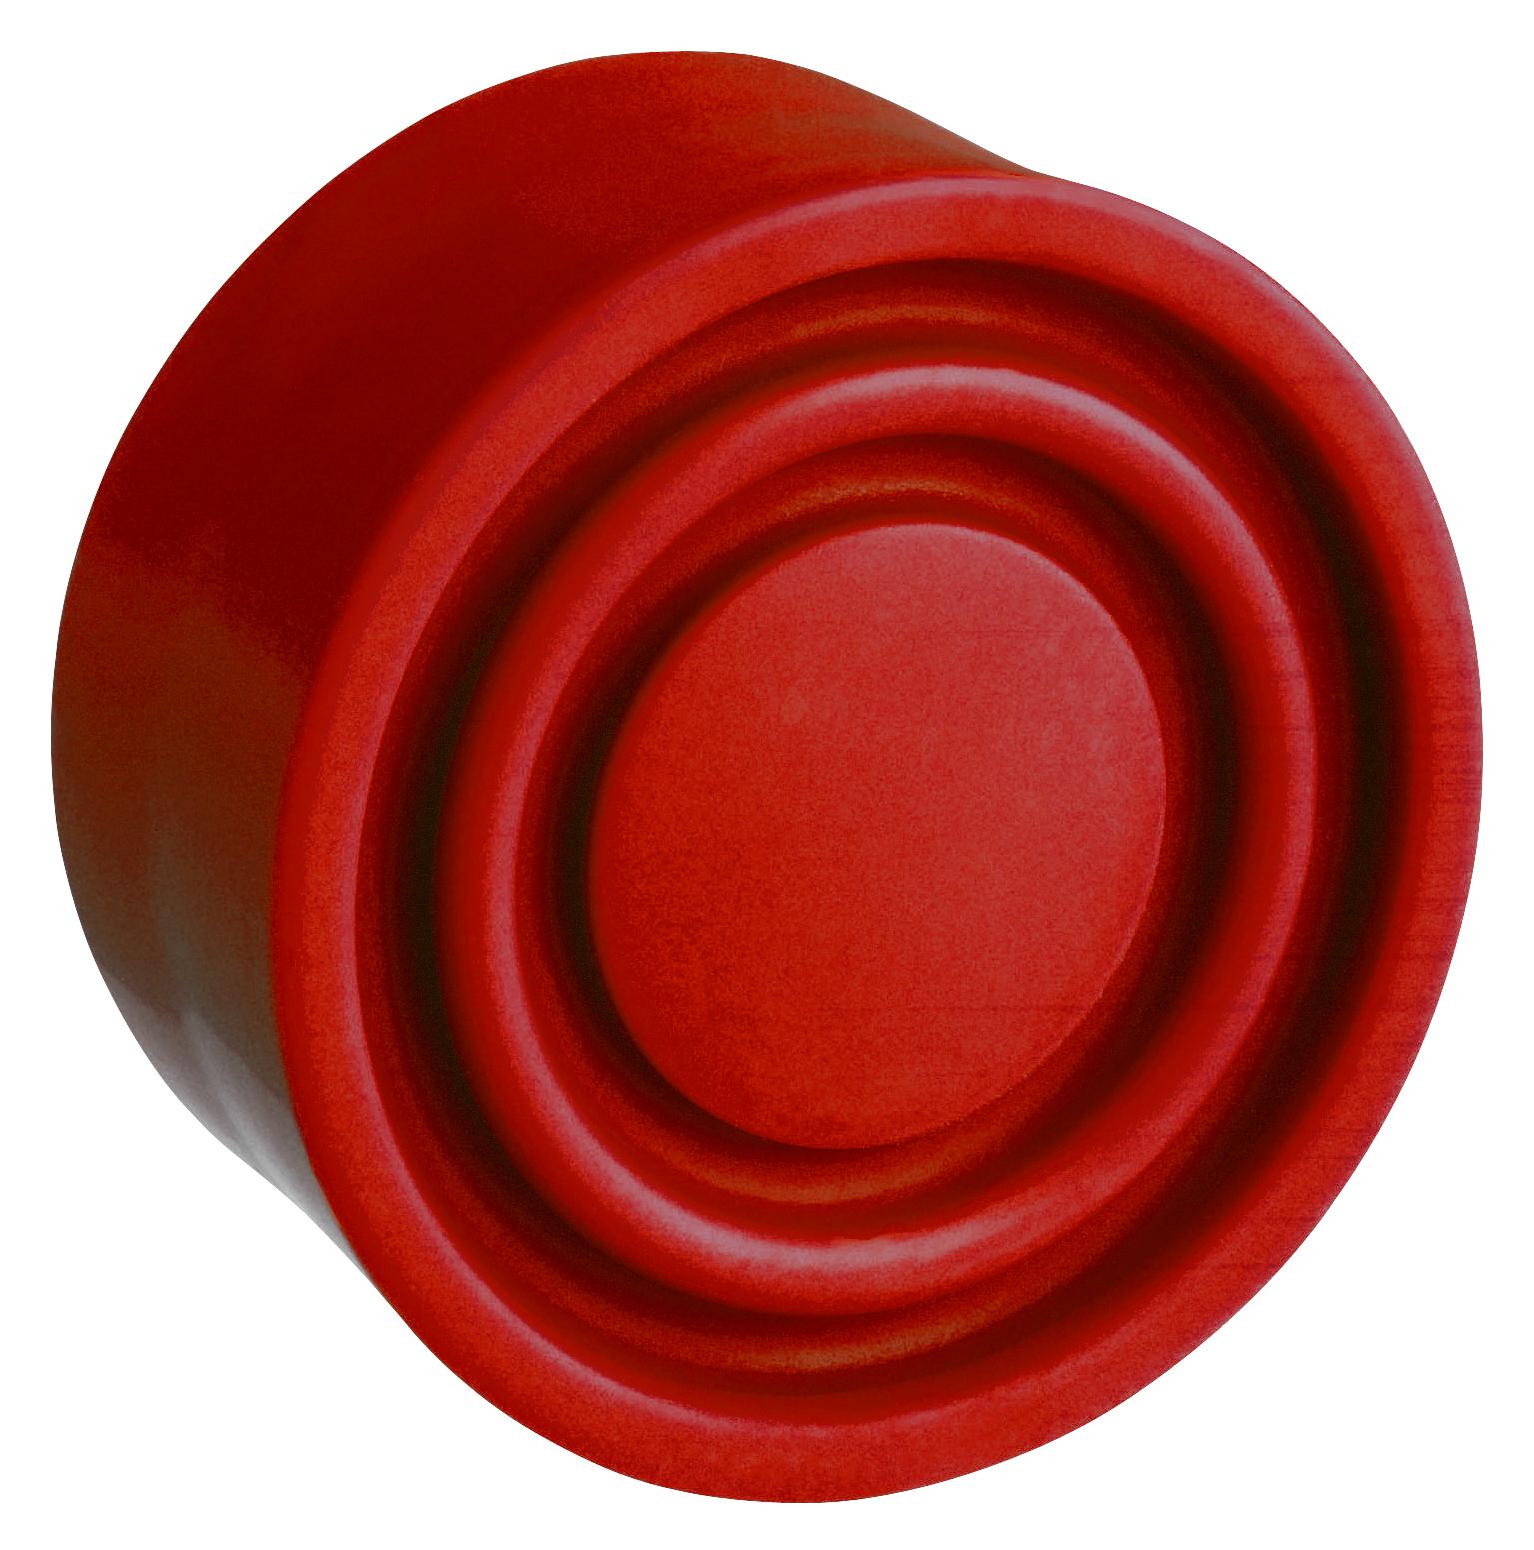 SCHNEIDER ELECTRIC Sealing Boots ZBP014 RED BOOT, FLUSH PUSH-BUTTON SCHNEIDER ELECTRIC 3109146 ZBP014